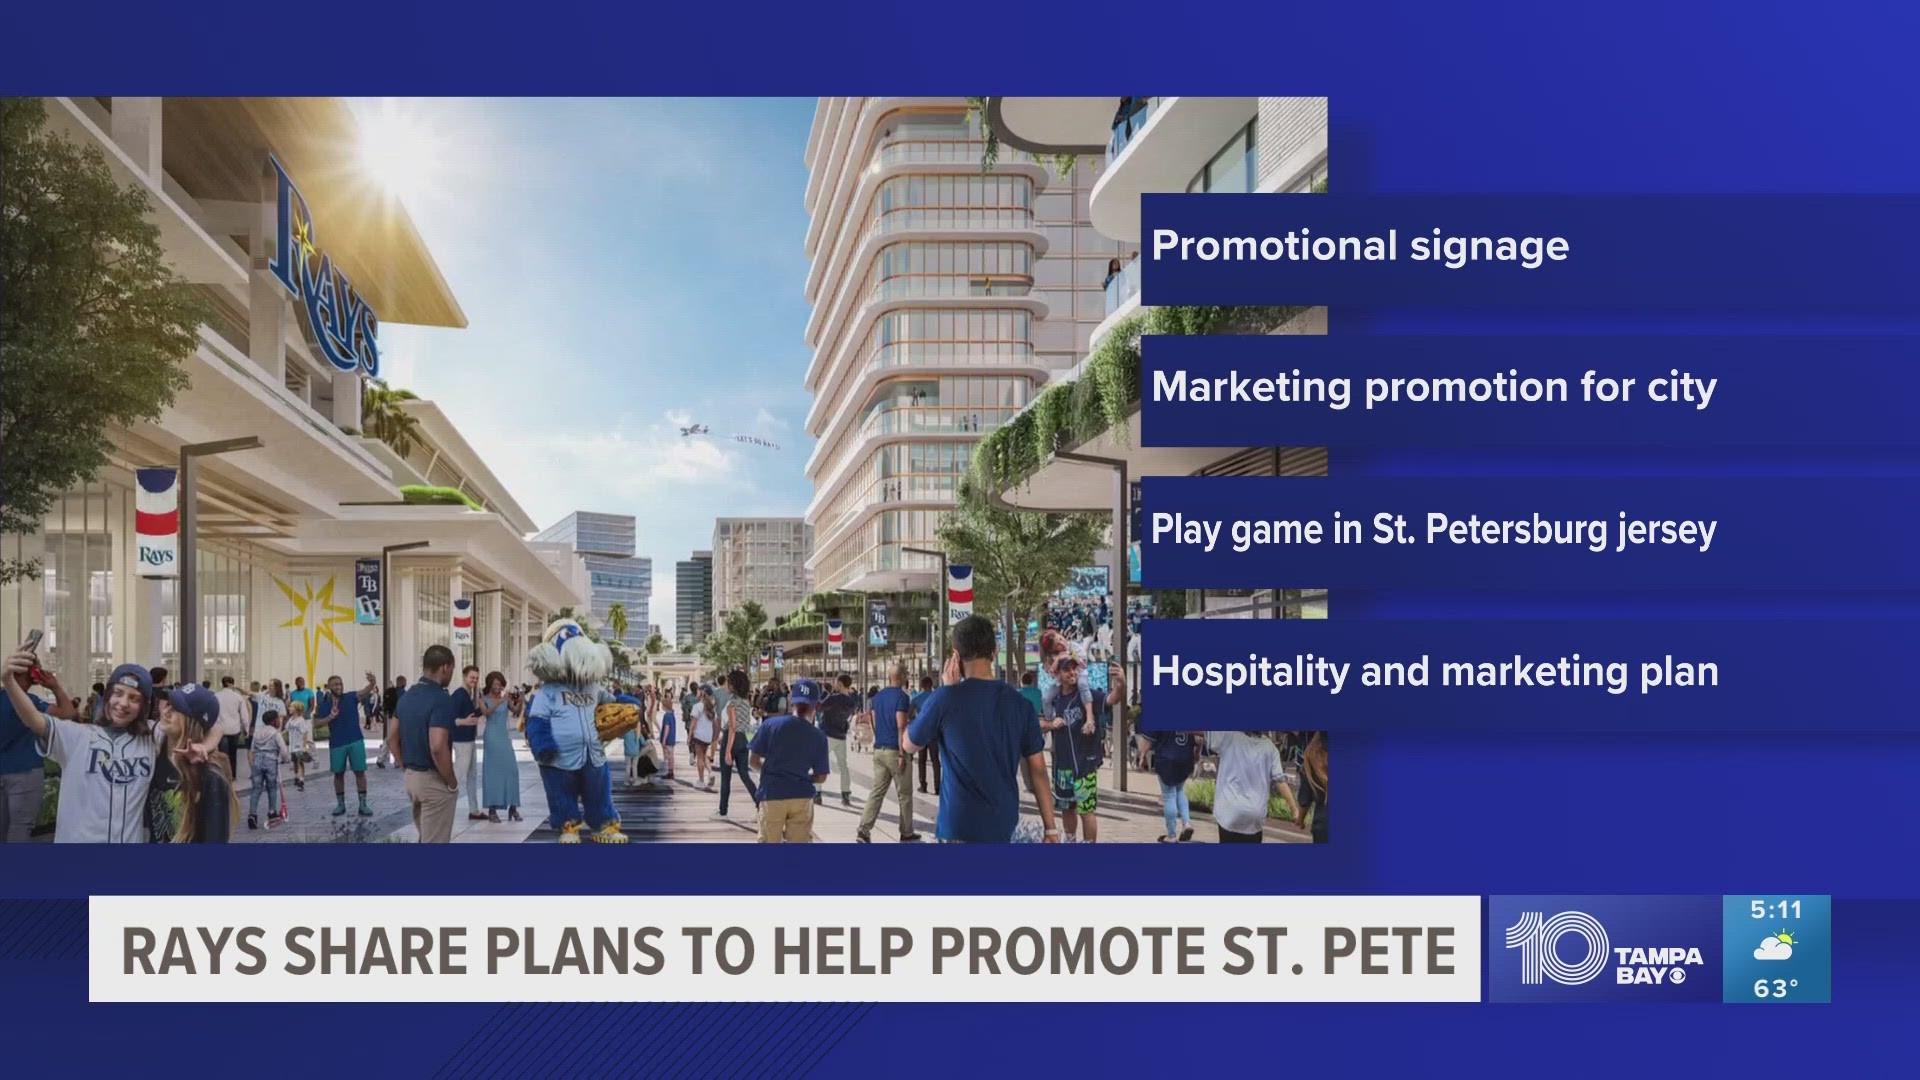 The Rays adamantly oppose changing the team name to the St. Petersburg Rays, as some on the city council and in the business community have suggested.